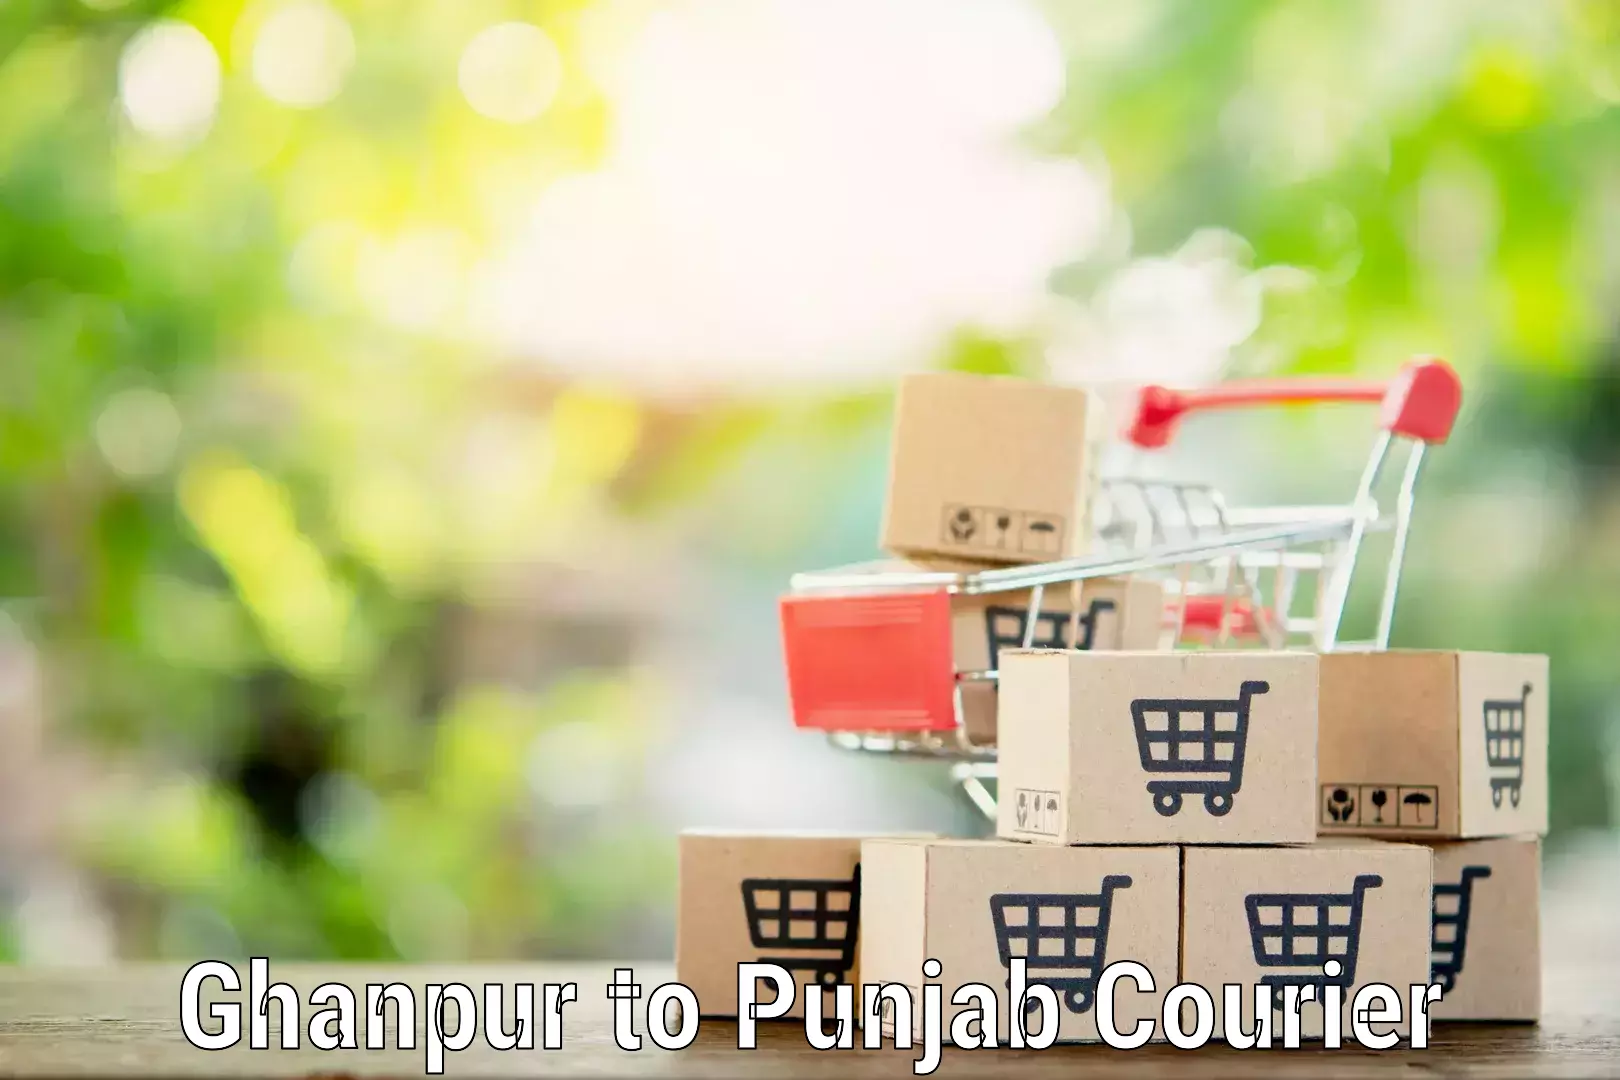 Moving and handling services Ghanpur to Mohali